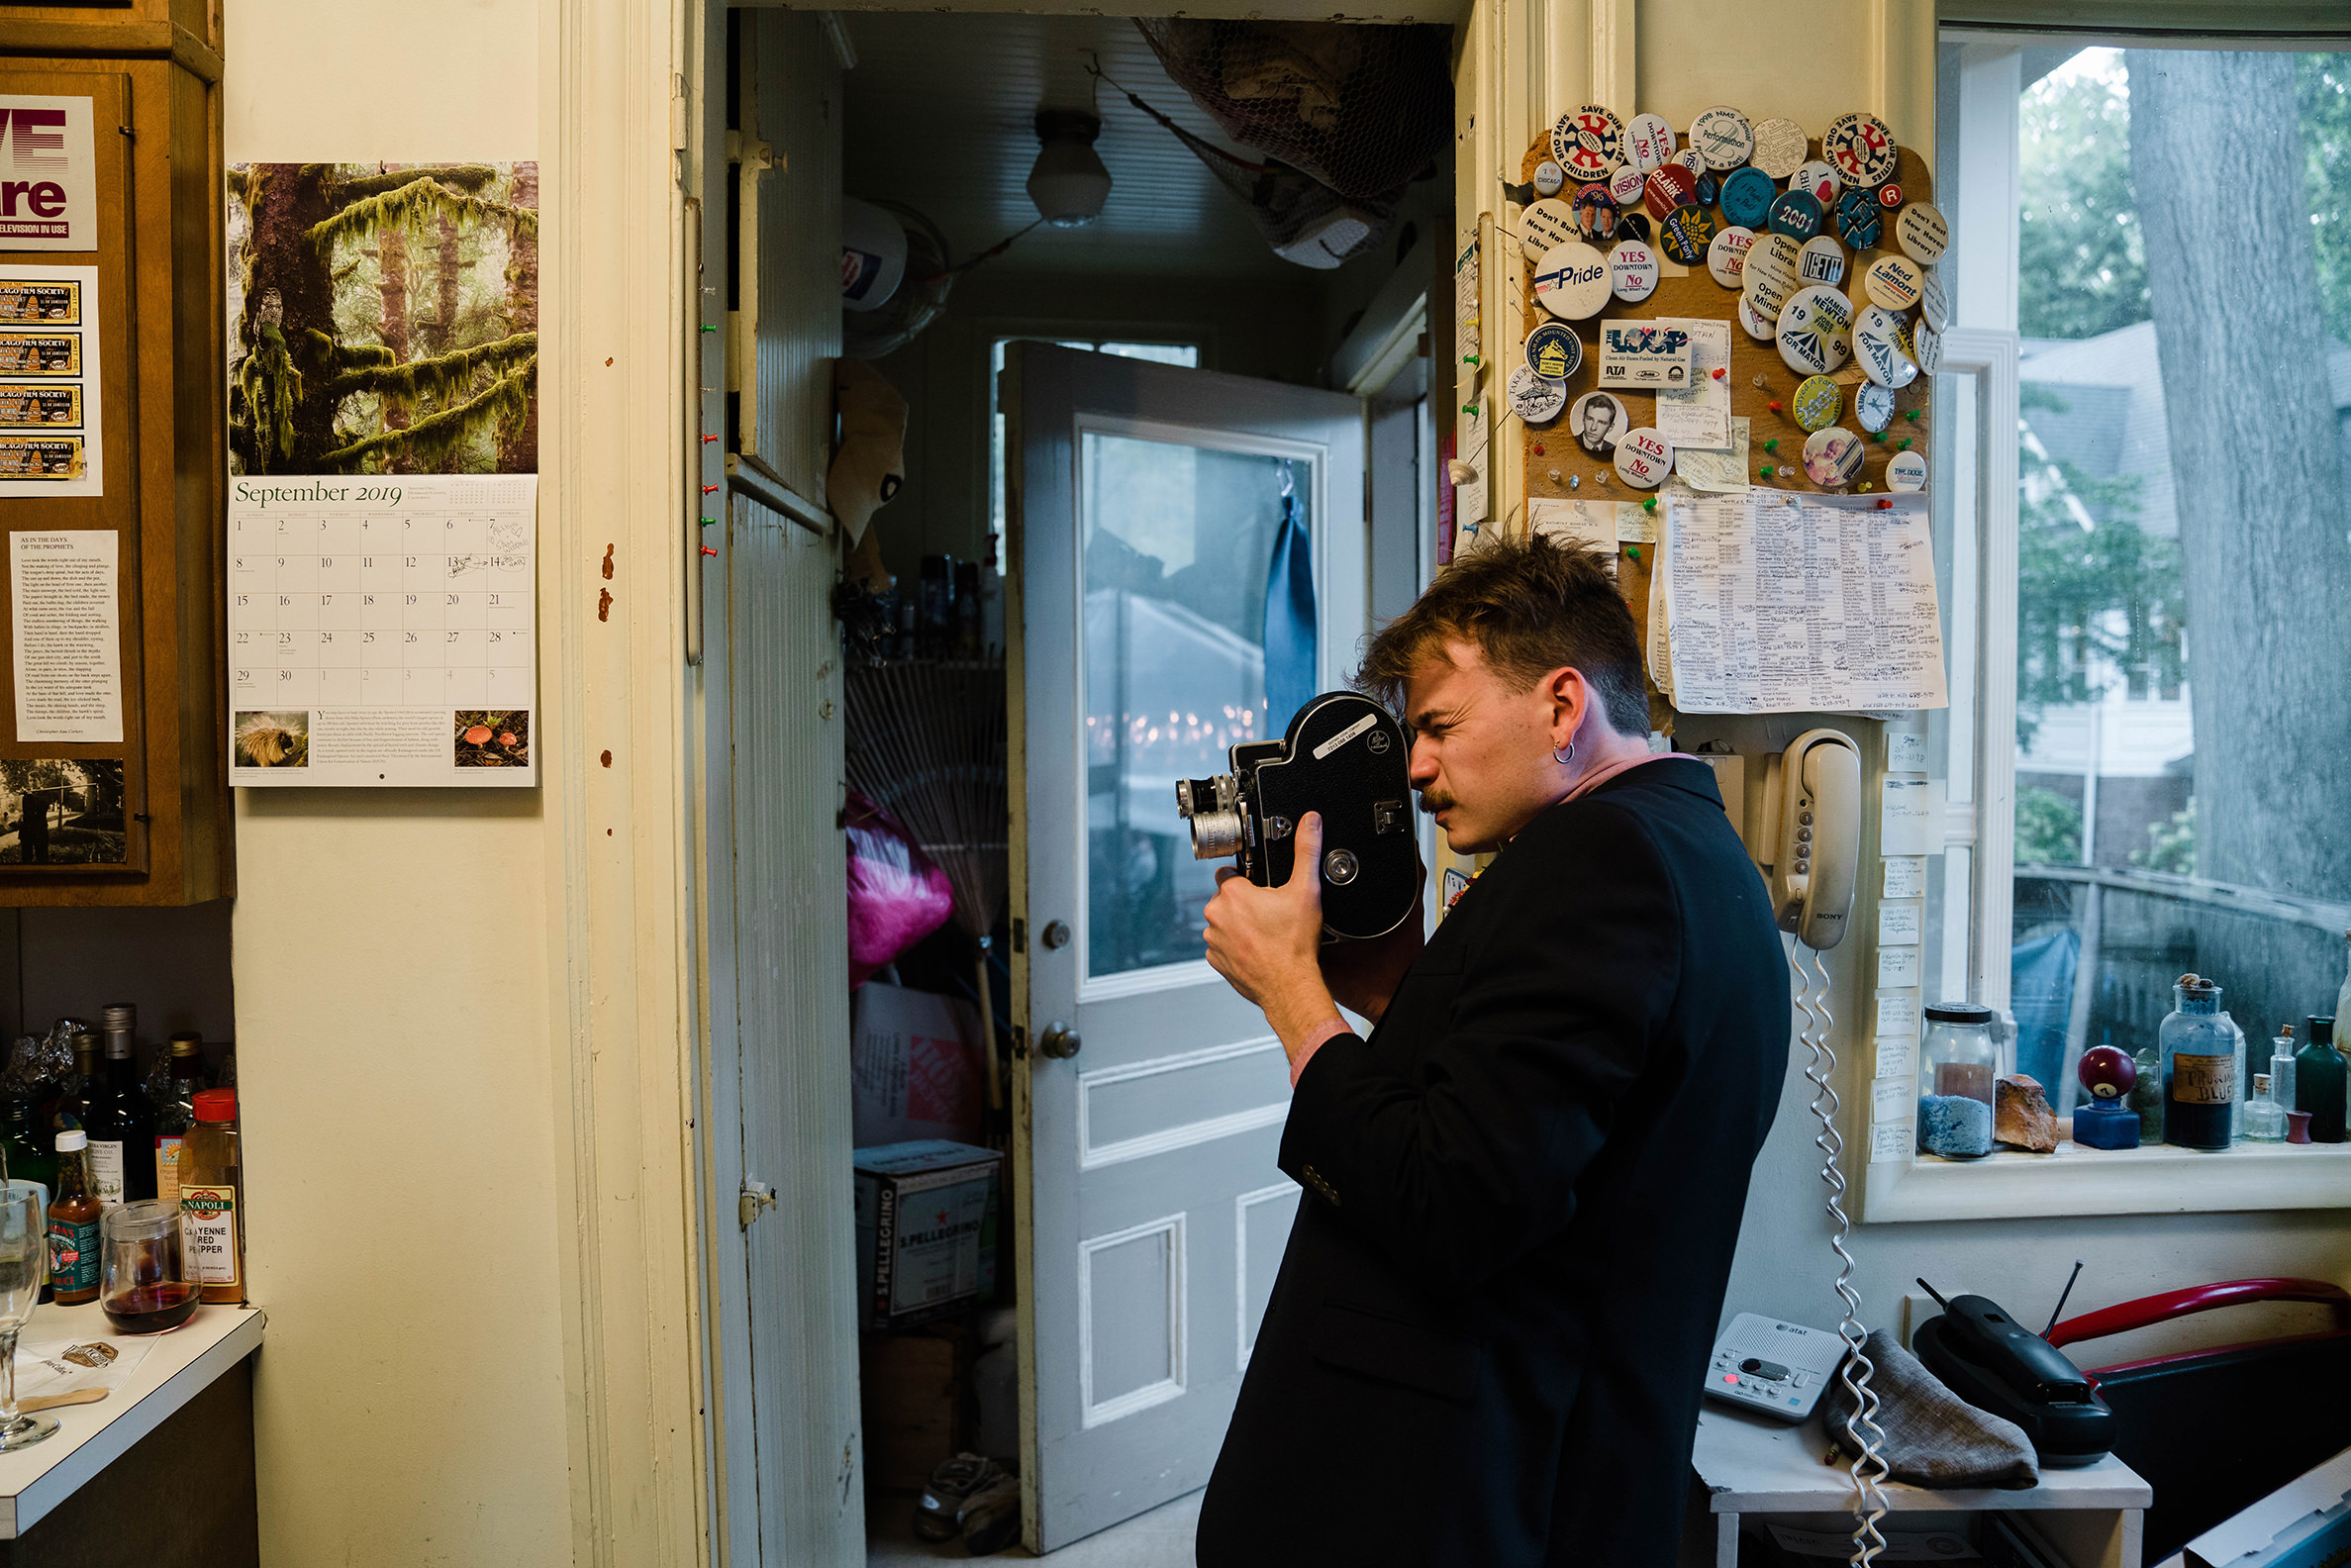 A documentary photograph featured in the best of wedding photography of 2019 showing a wedding guest filming the wedding